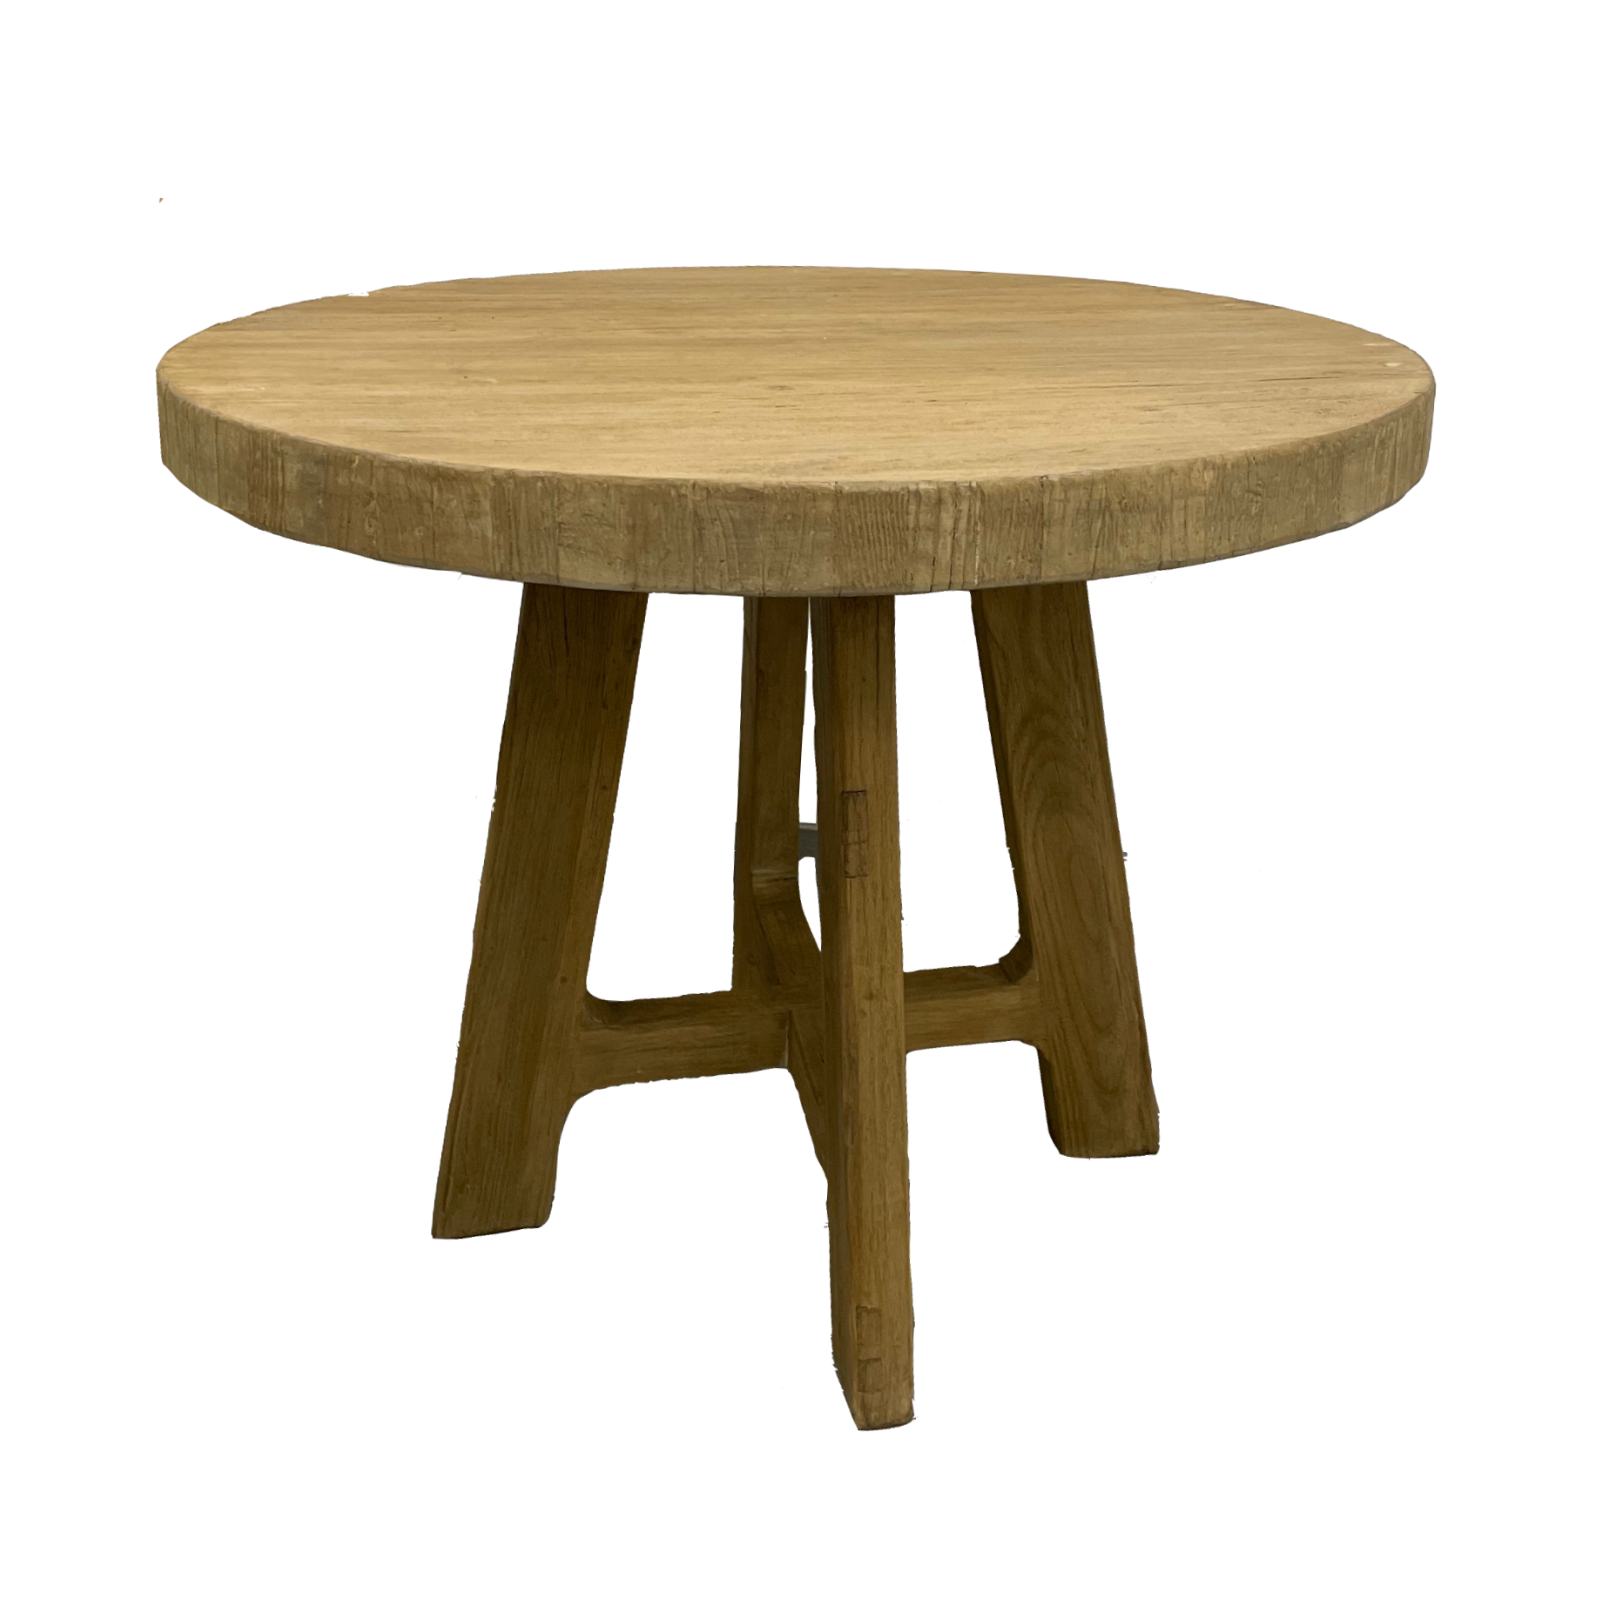 Lennon Reclaimed Wood Round Dining Table - Rug & Weave